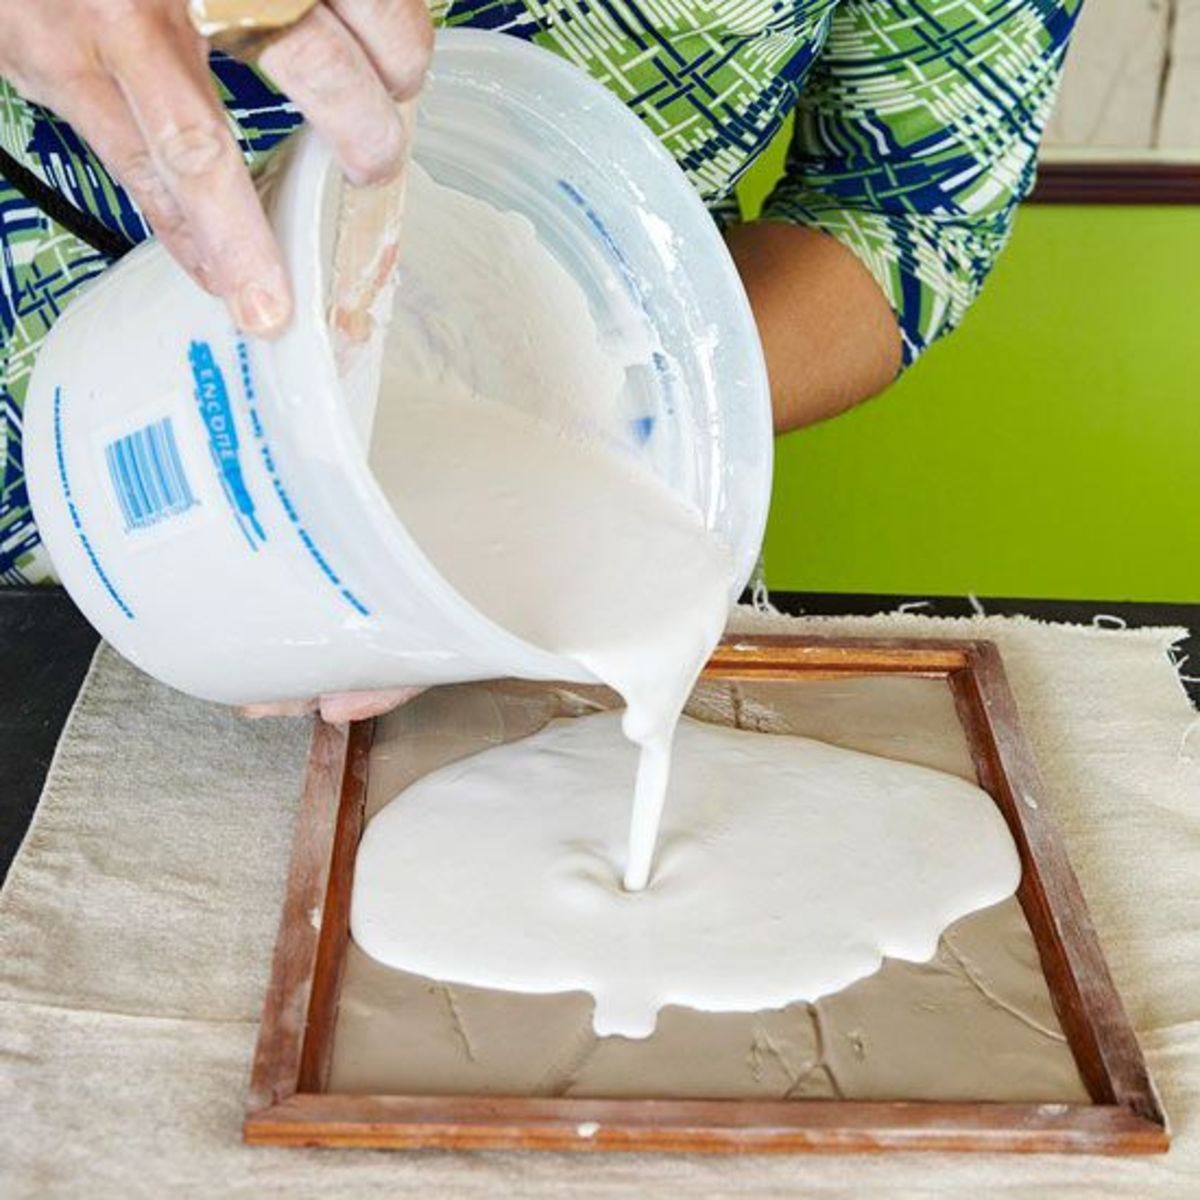 Pouring the mixed plaster of Paris into the mold